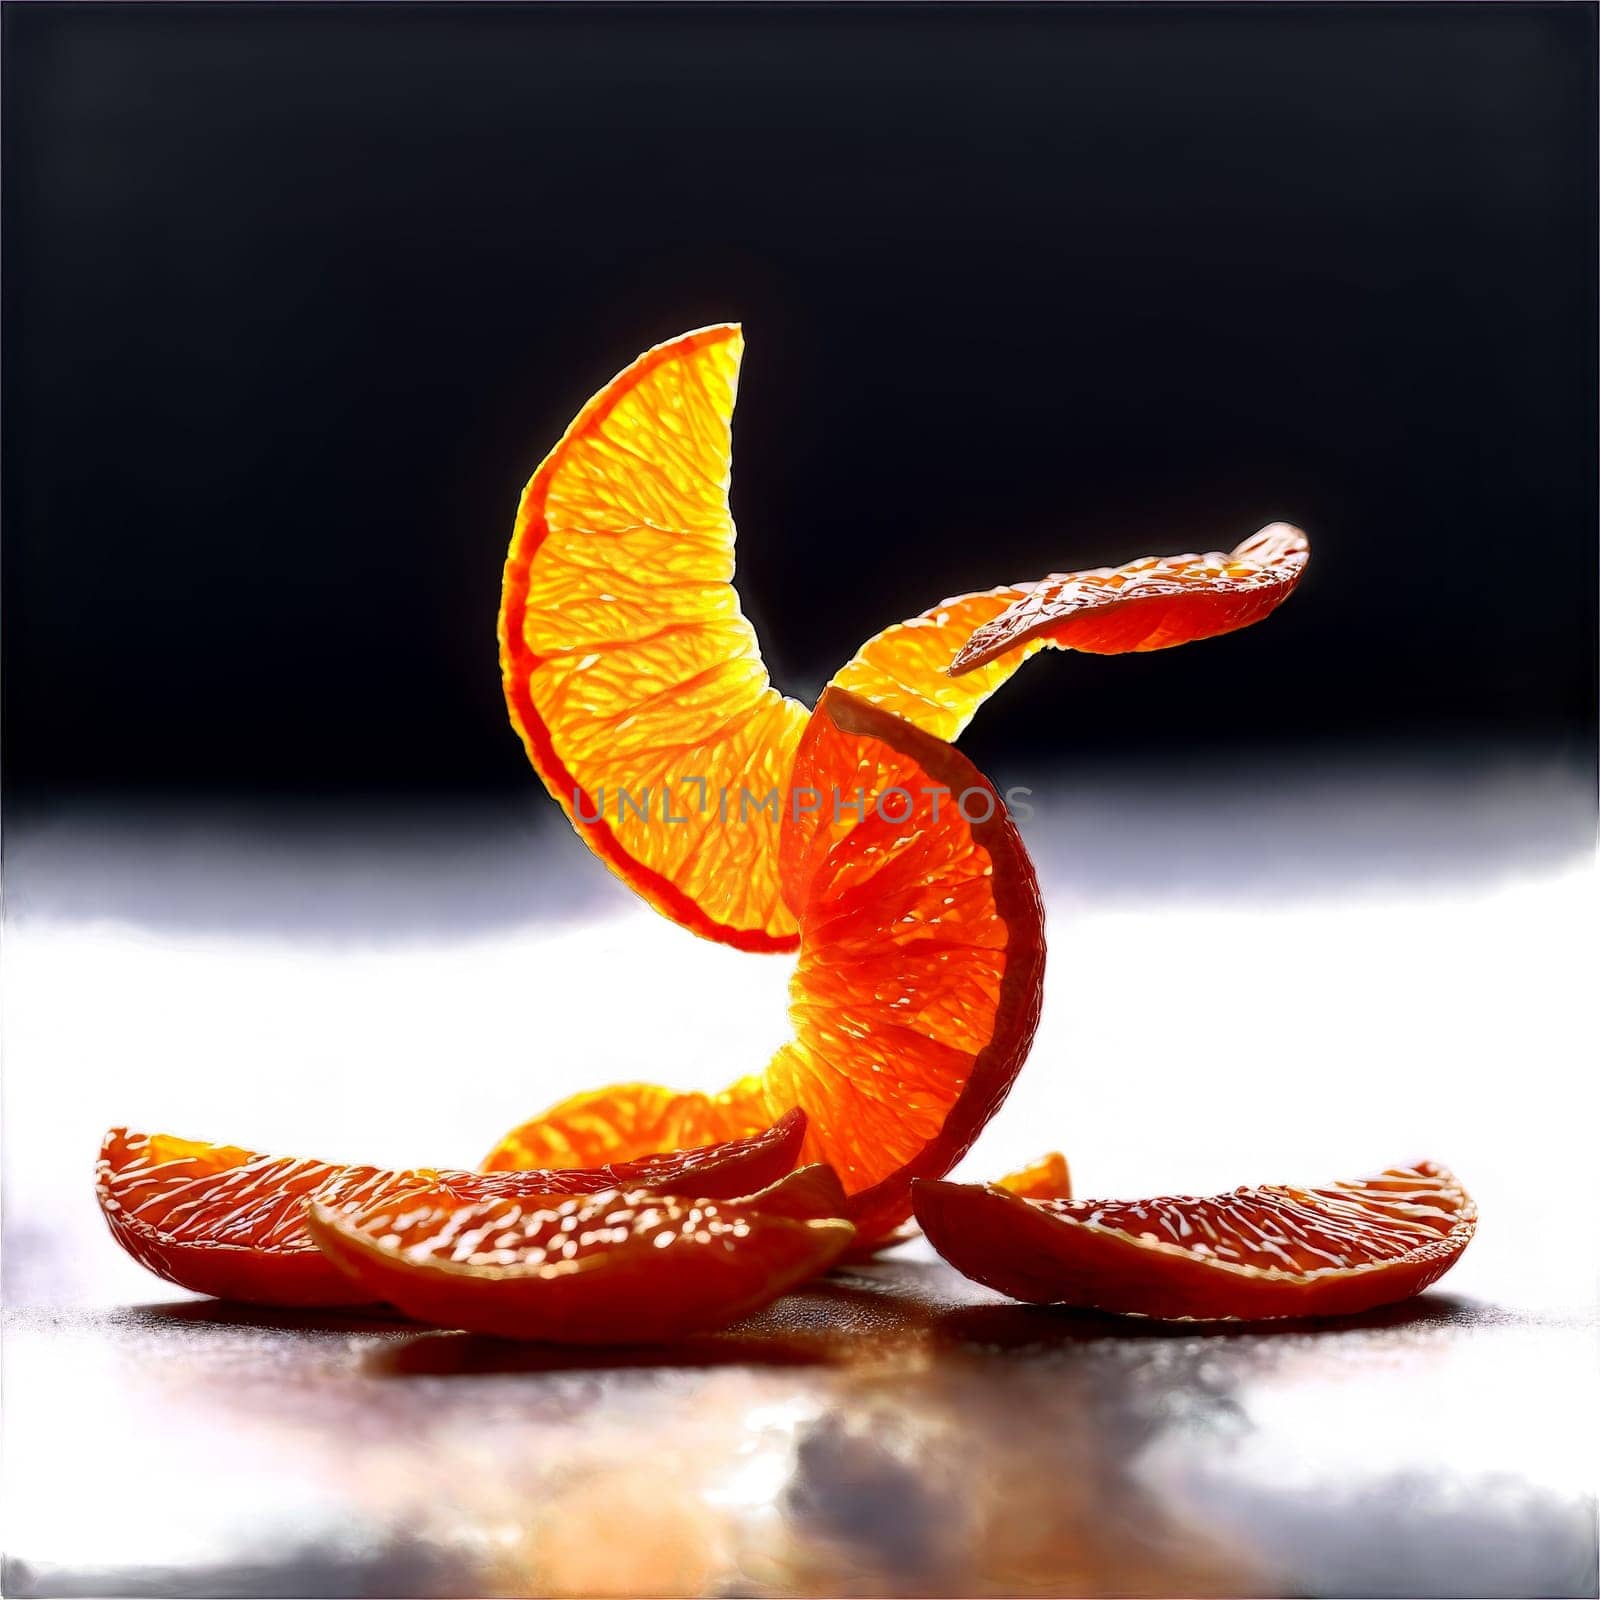 Dried tangerine peel slivers vibrant orange with a zesty scent dancing vivaciously as if celebrating by panophotograph